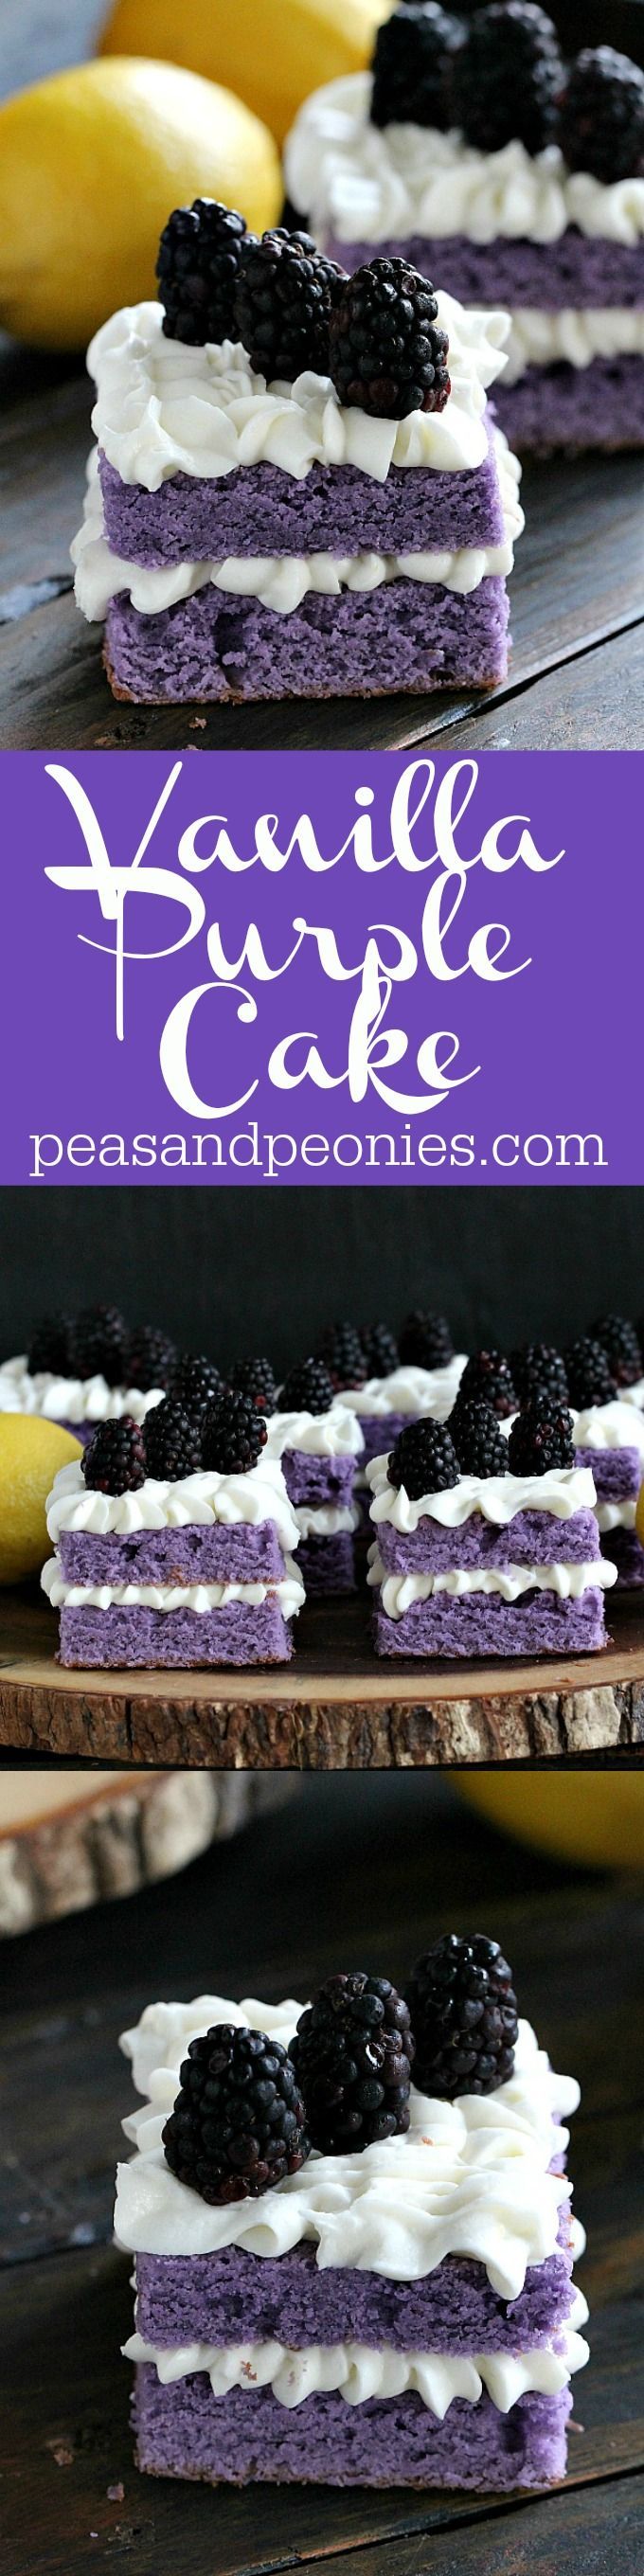 Vanilla Purple Cake with Lemon Buttercream is cut into mini individual cakes decorated with fresh blackberries, for a beautiful